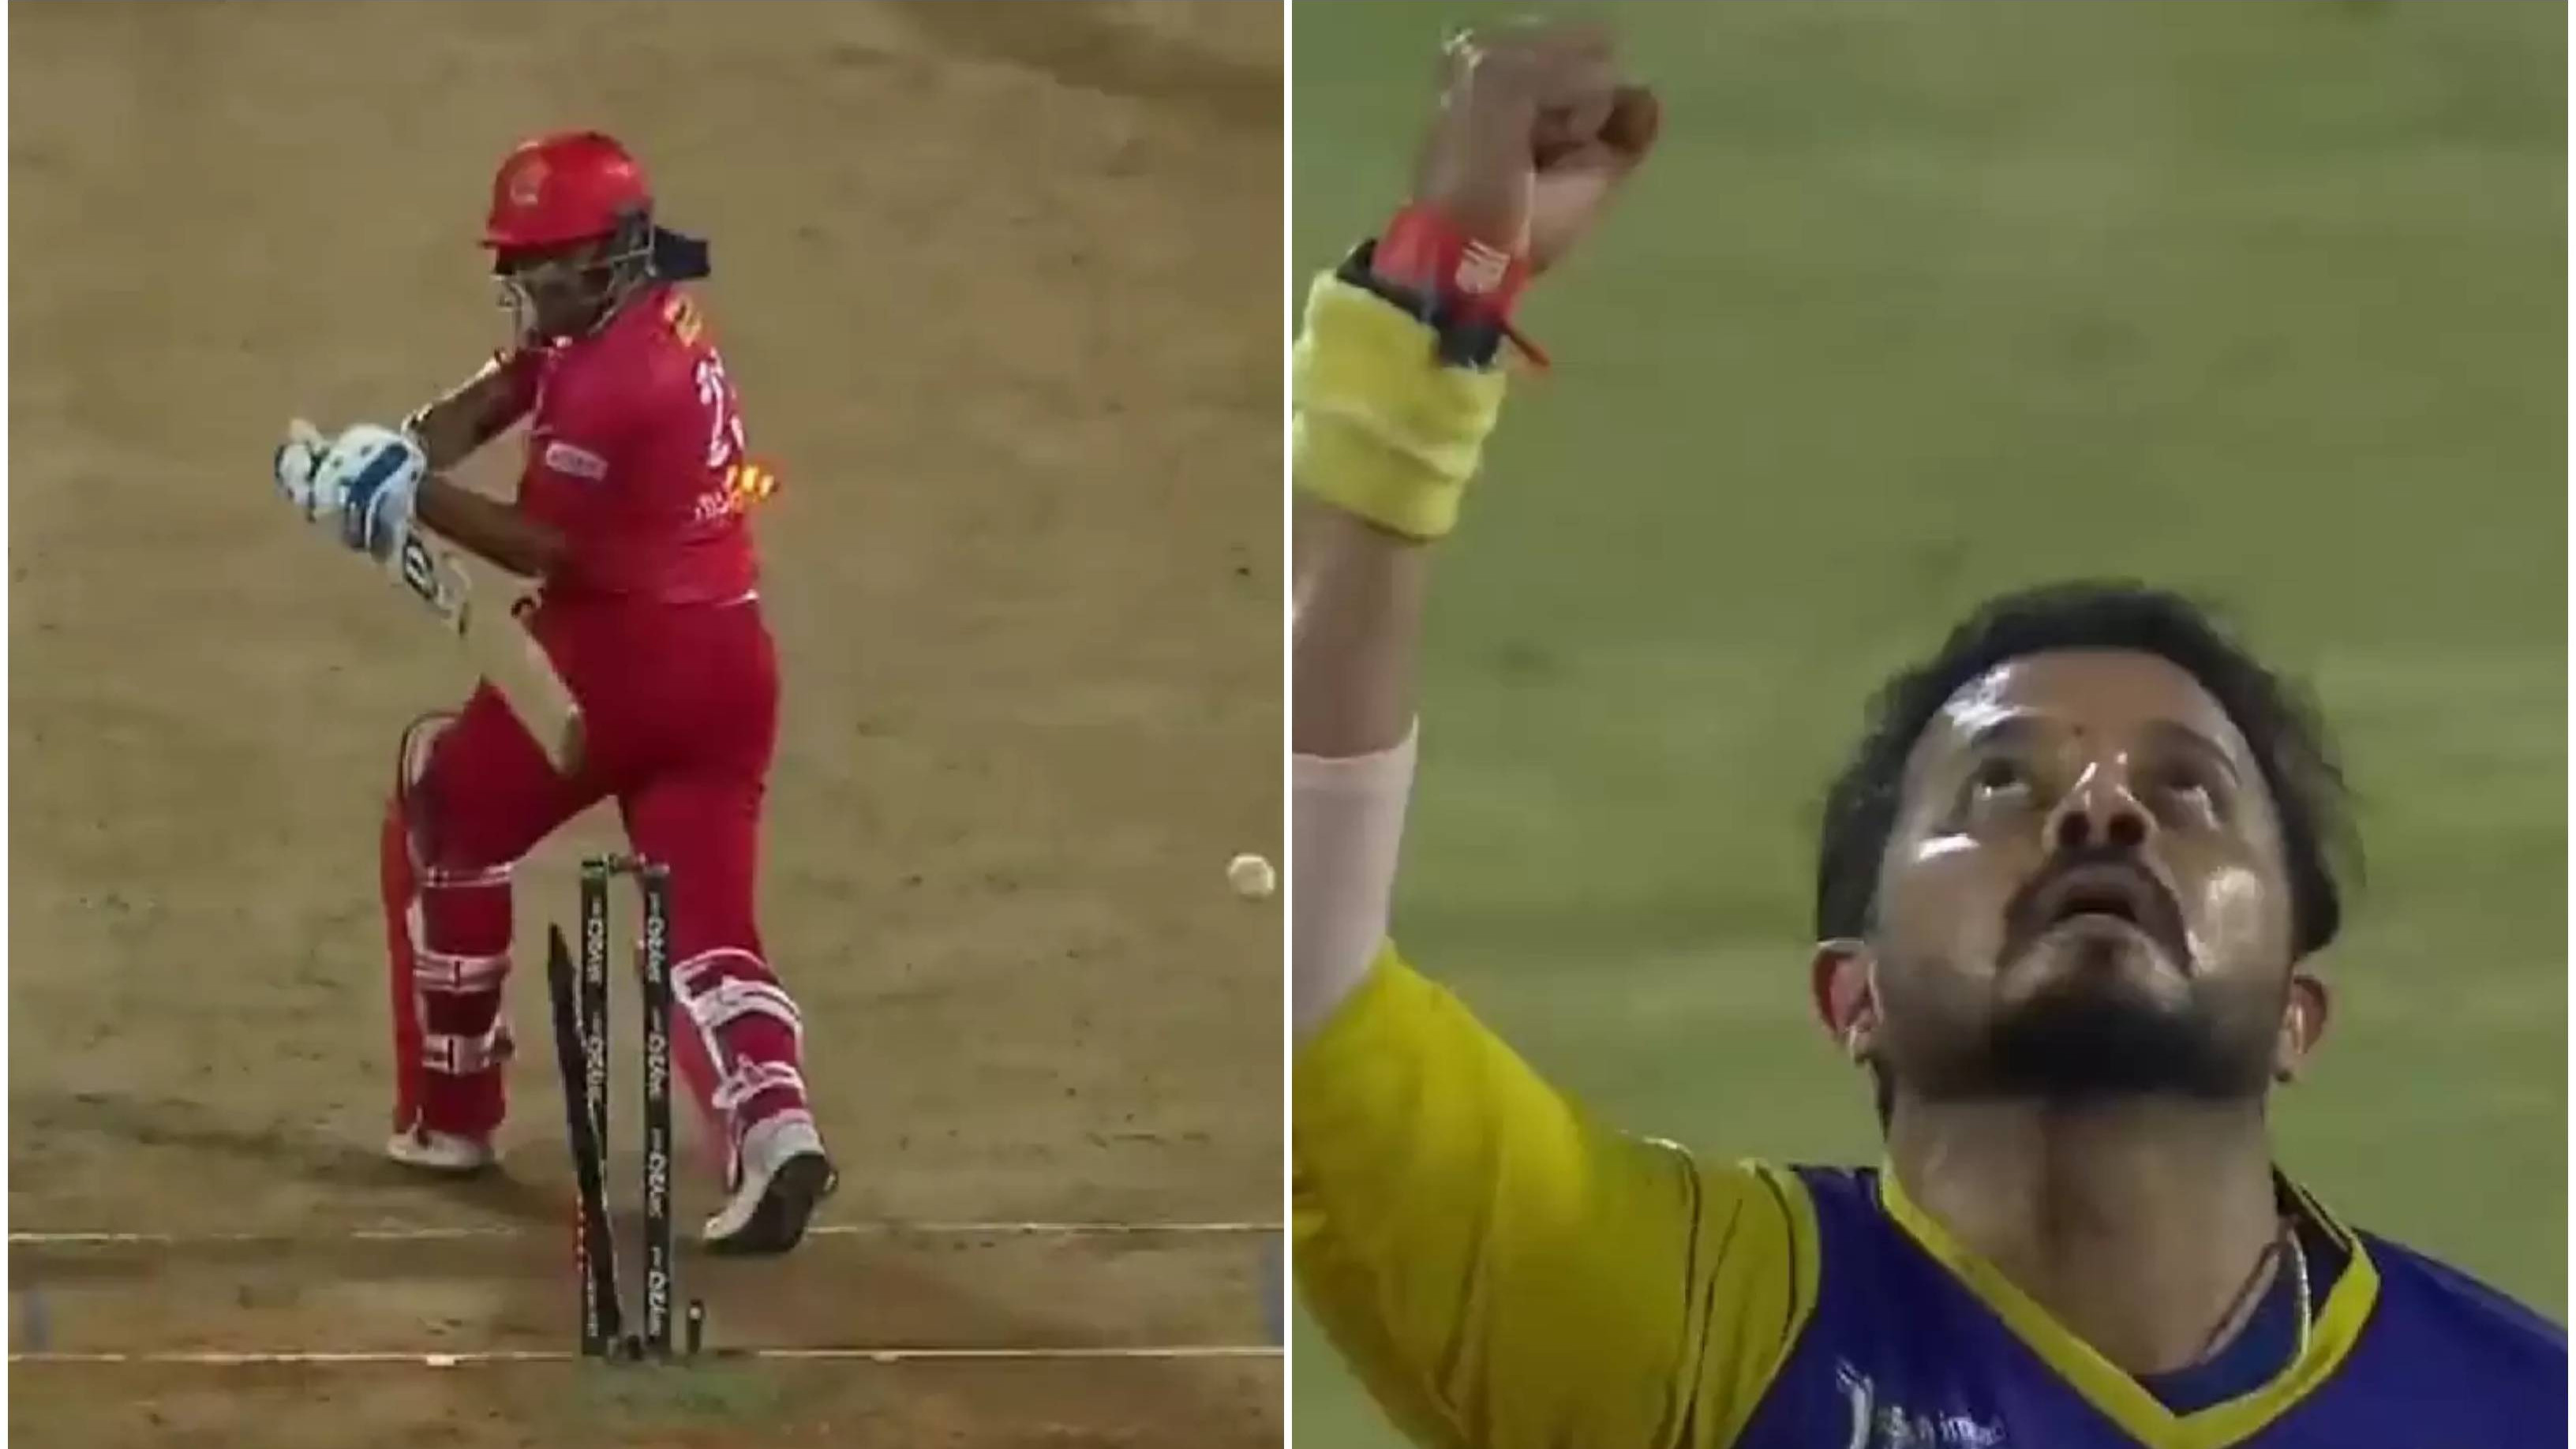 LLC T20 2022: WATCH - Sreesanth cleans up Tillakaratne Dilshan with a ripper in Legends League Cricket